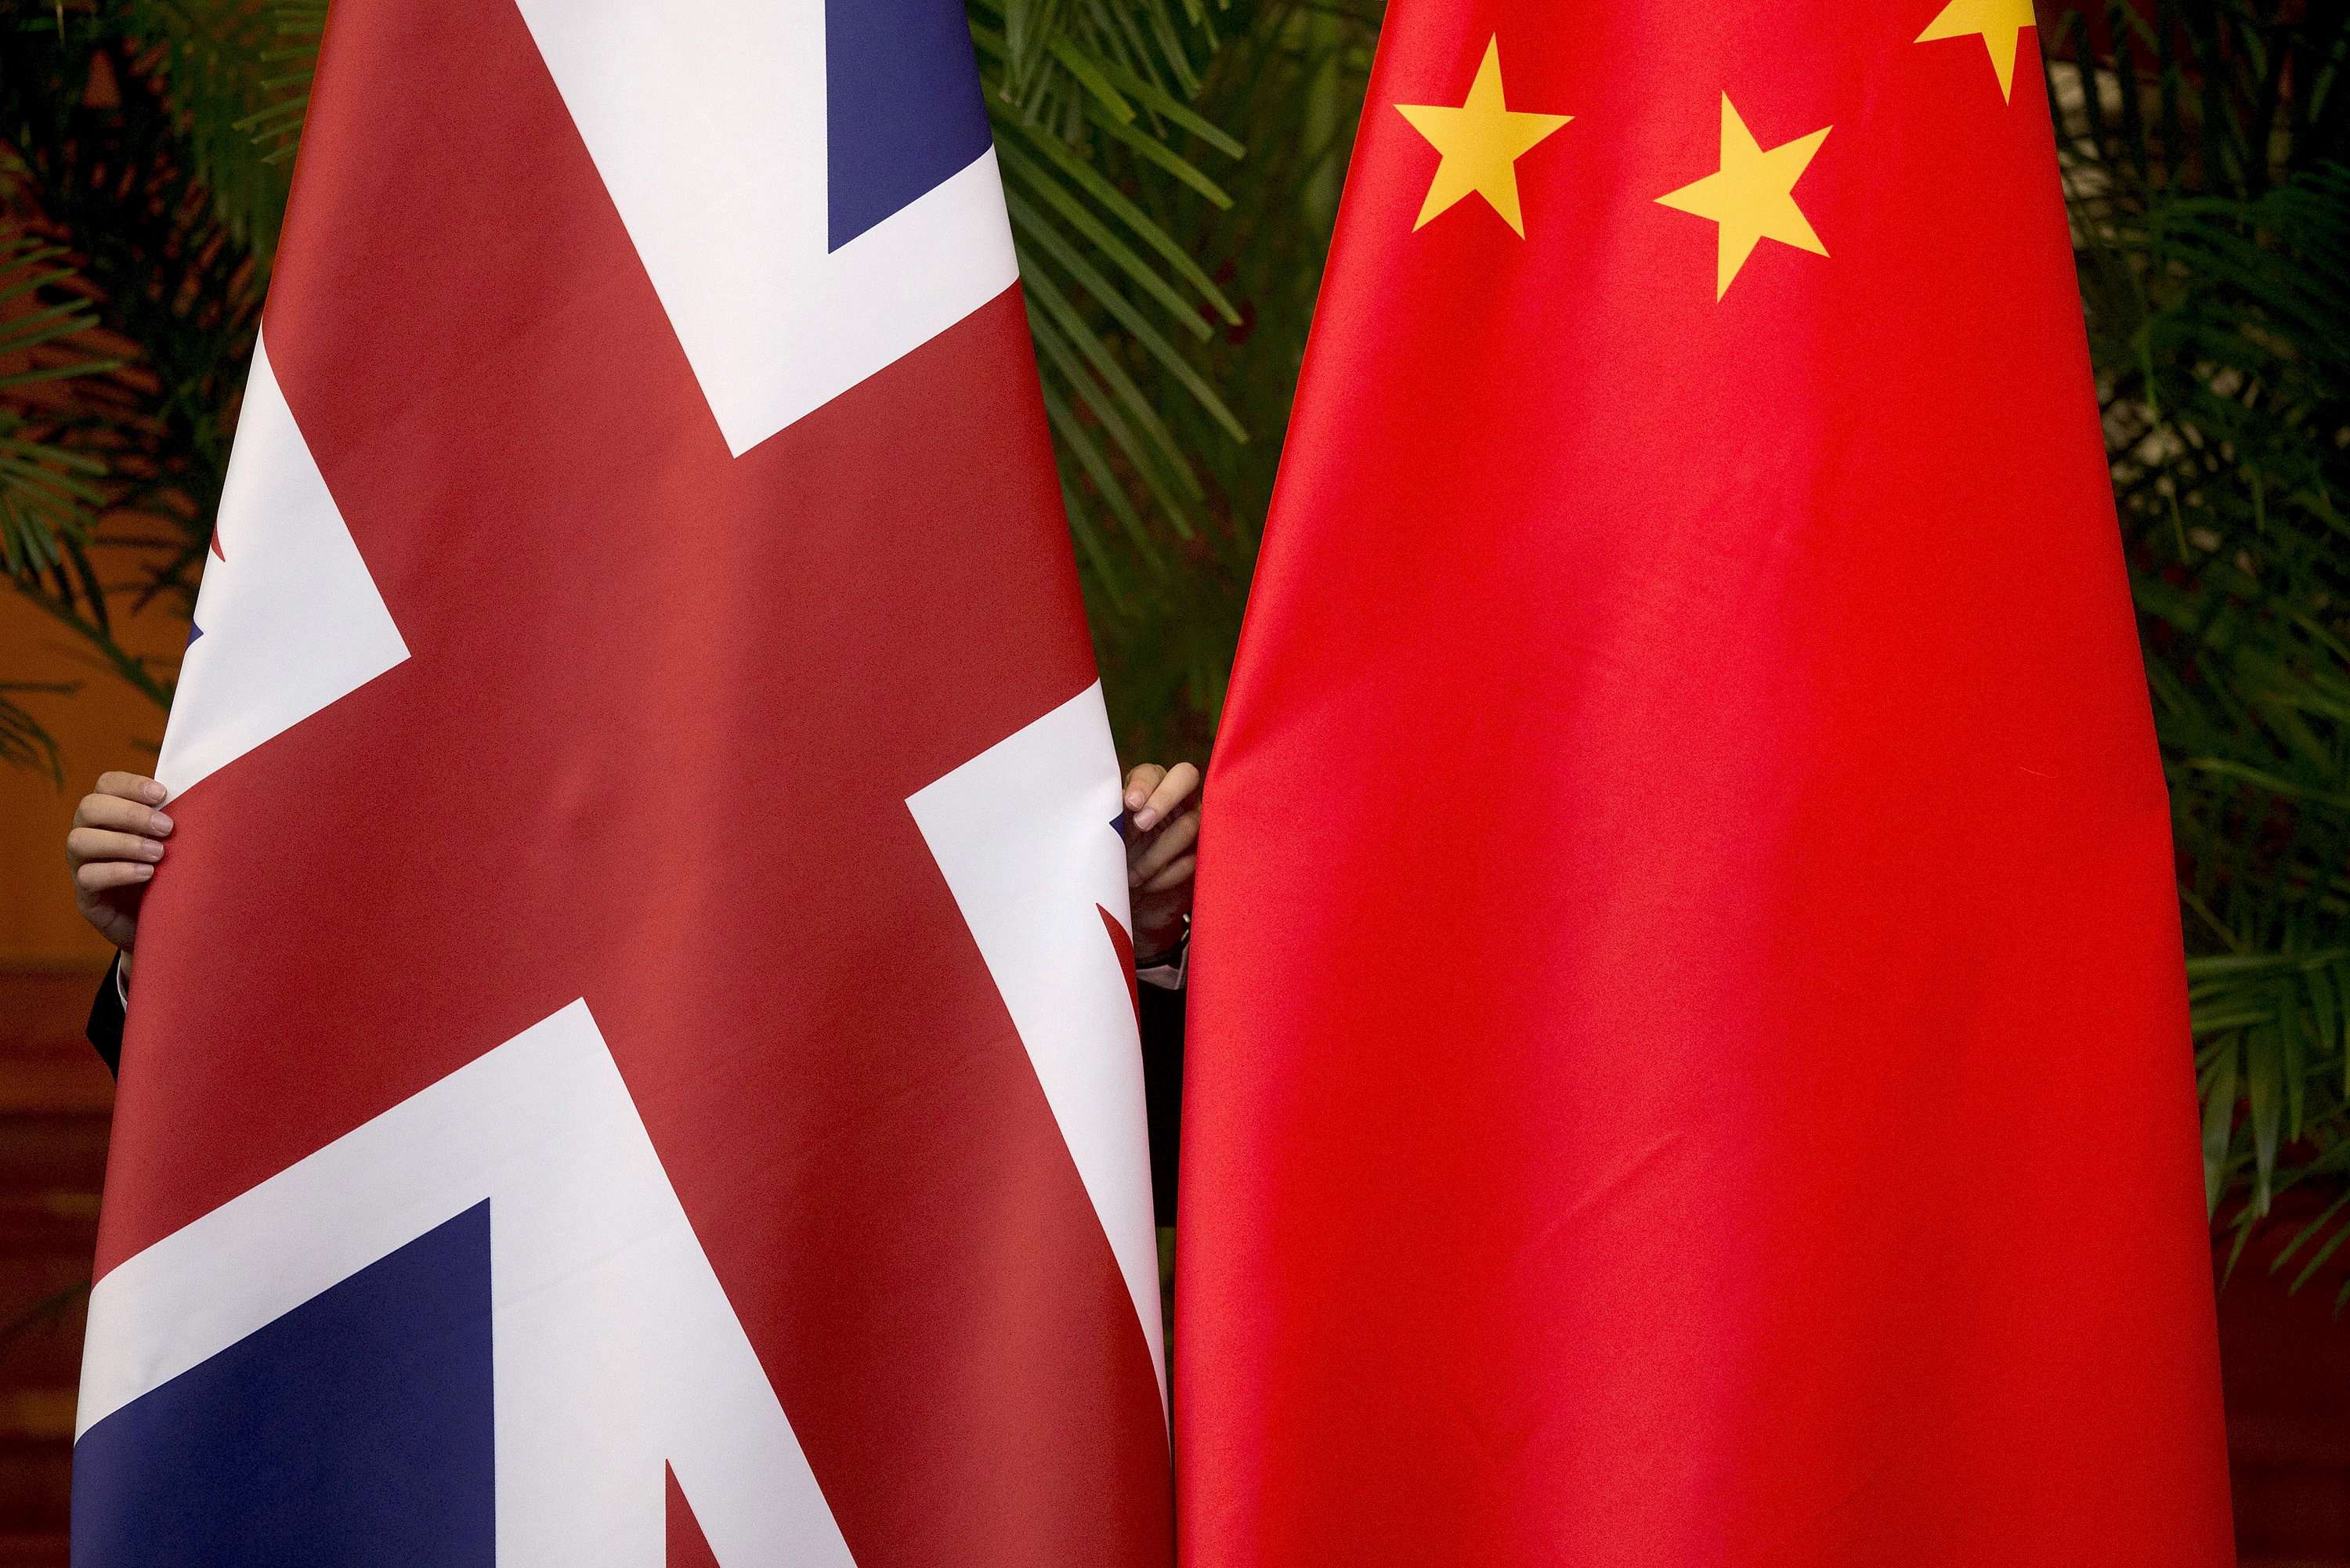 Britain voted last year to leave the EU but China says the challenges facing the bloc could be an opportunity to ‘mature’. Photo: Reuters